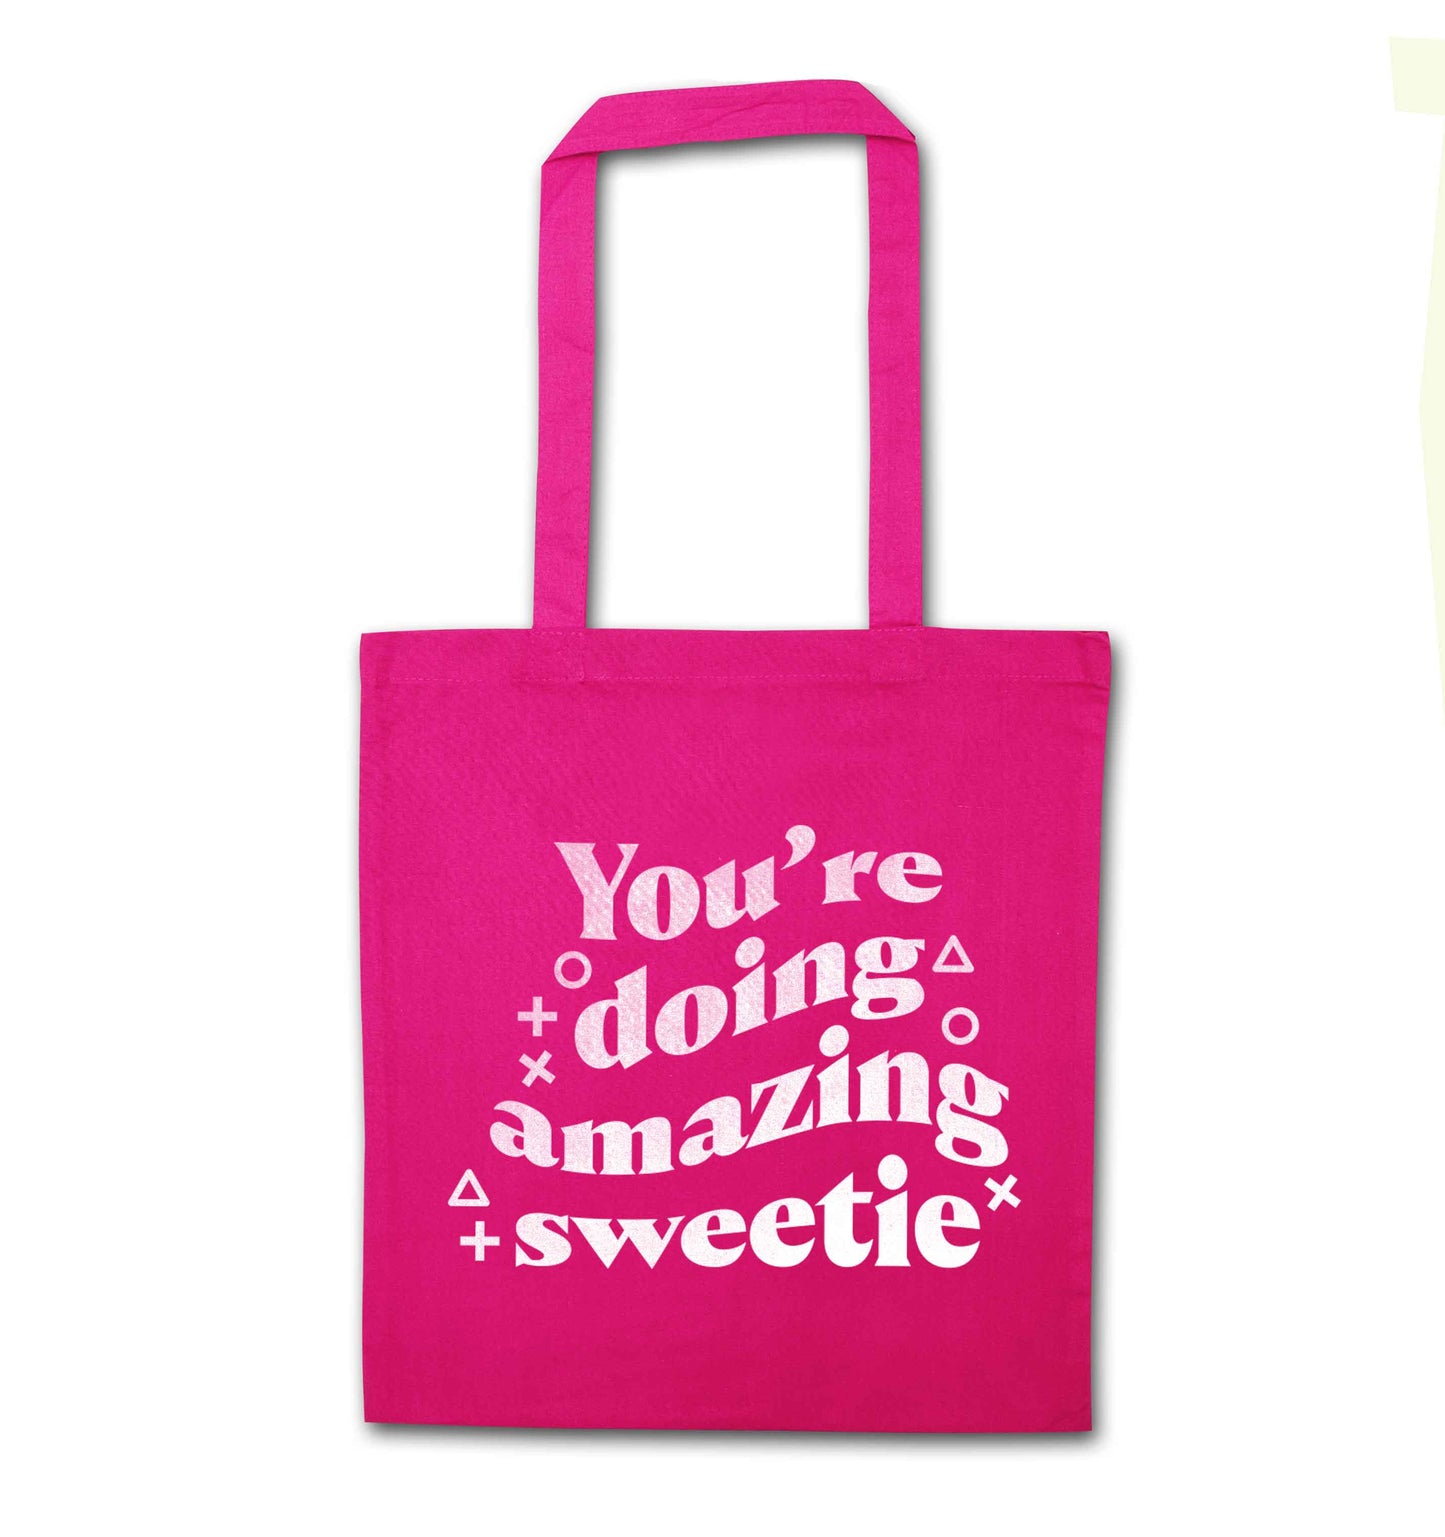 You're doing amazing sweetie pink tote bag